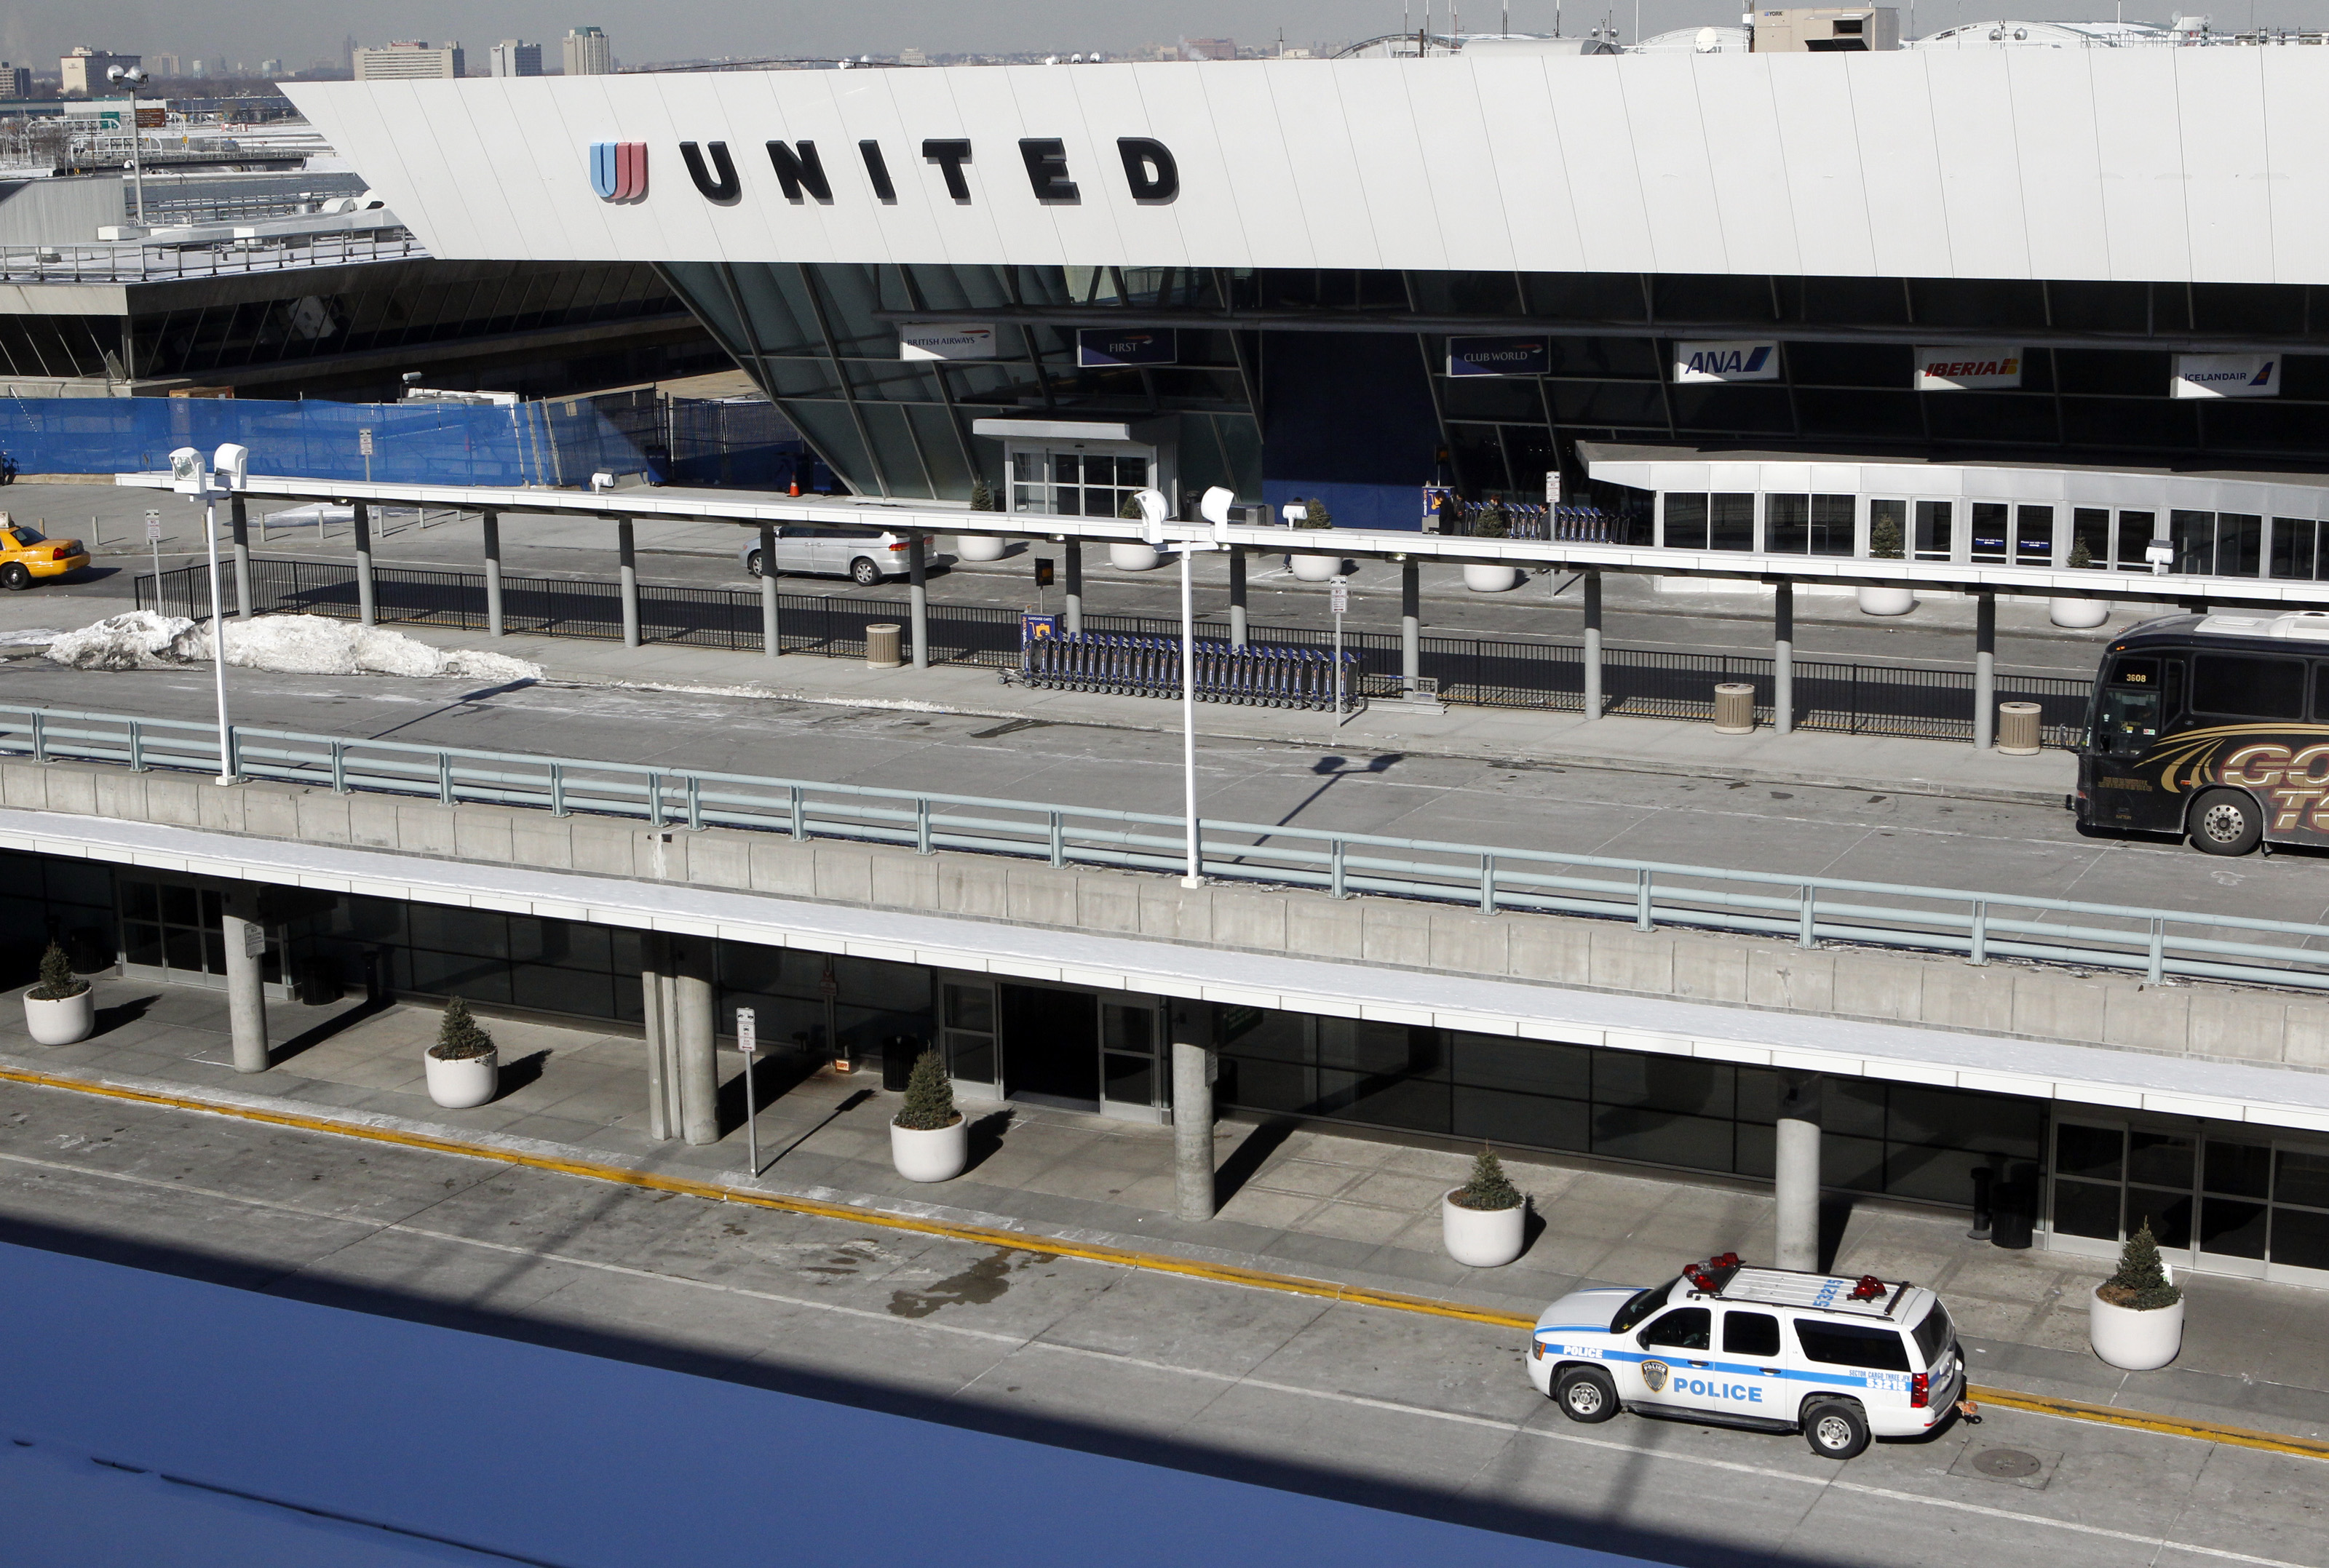 A police vehicle is parked outside a United Airlines terminal at John F. Kennedy International Airport in New York